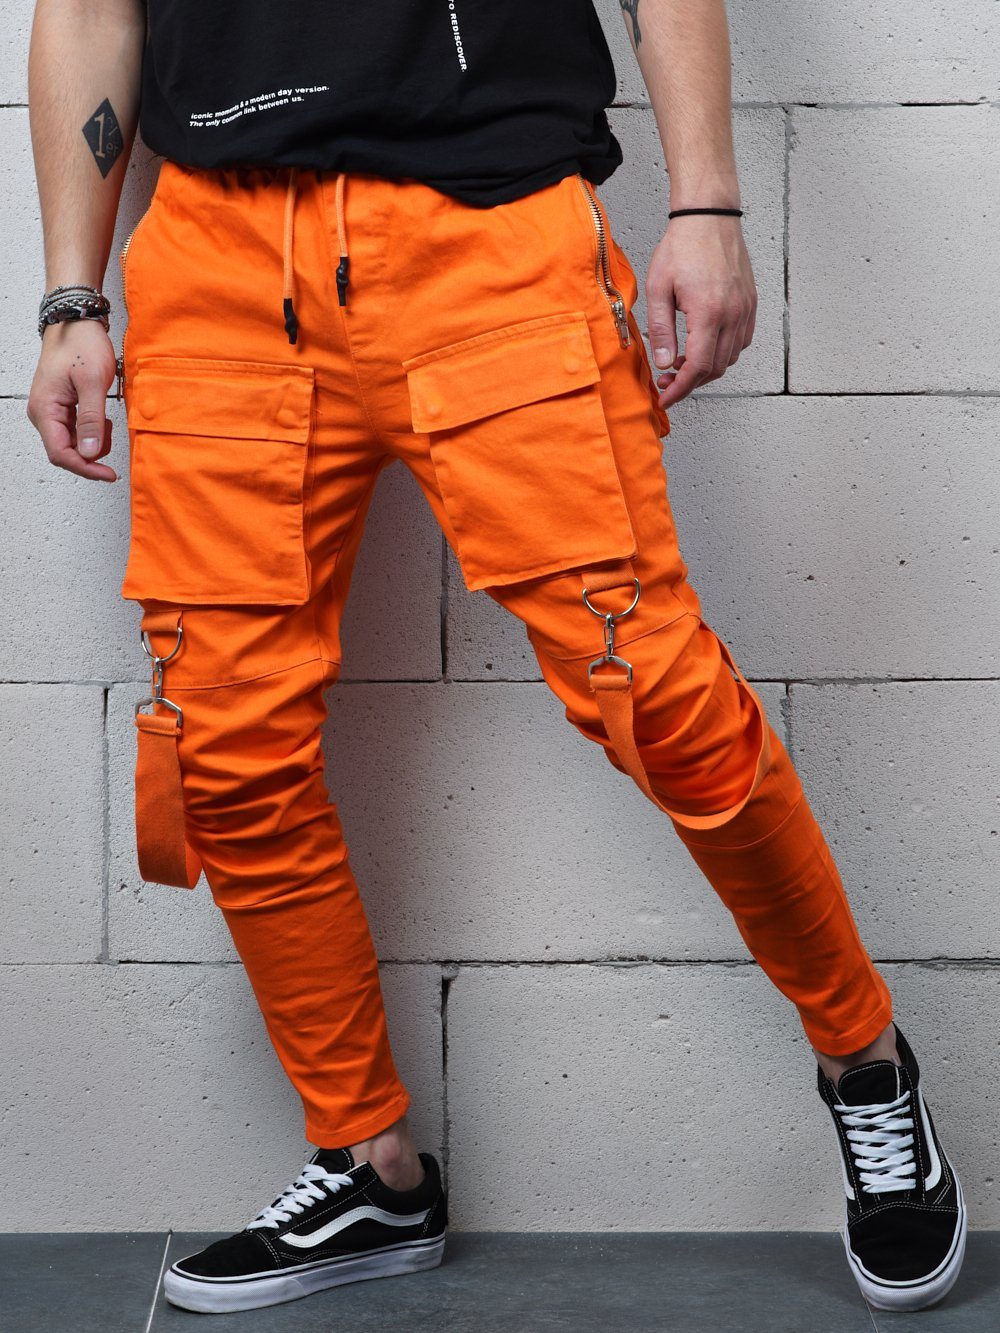 A man in ORANGE BRONX cargo pants leaning against a wall.